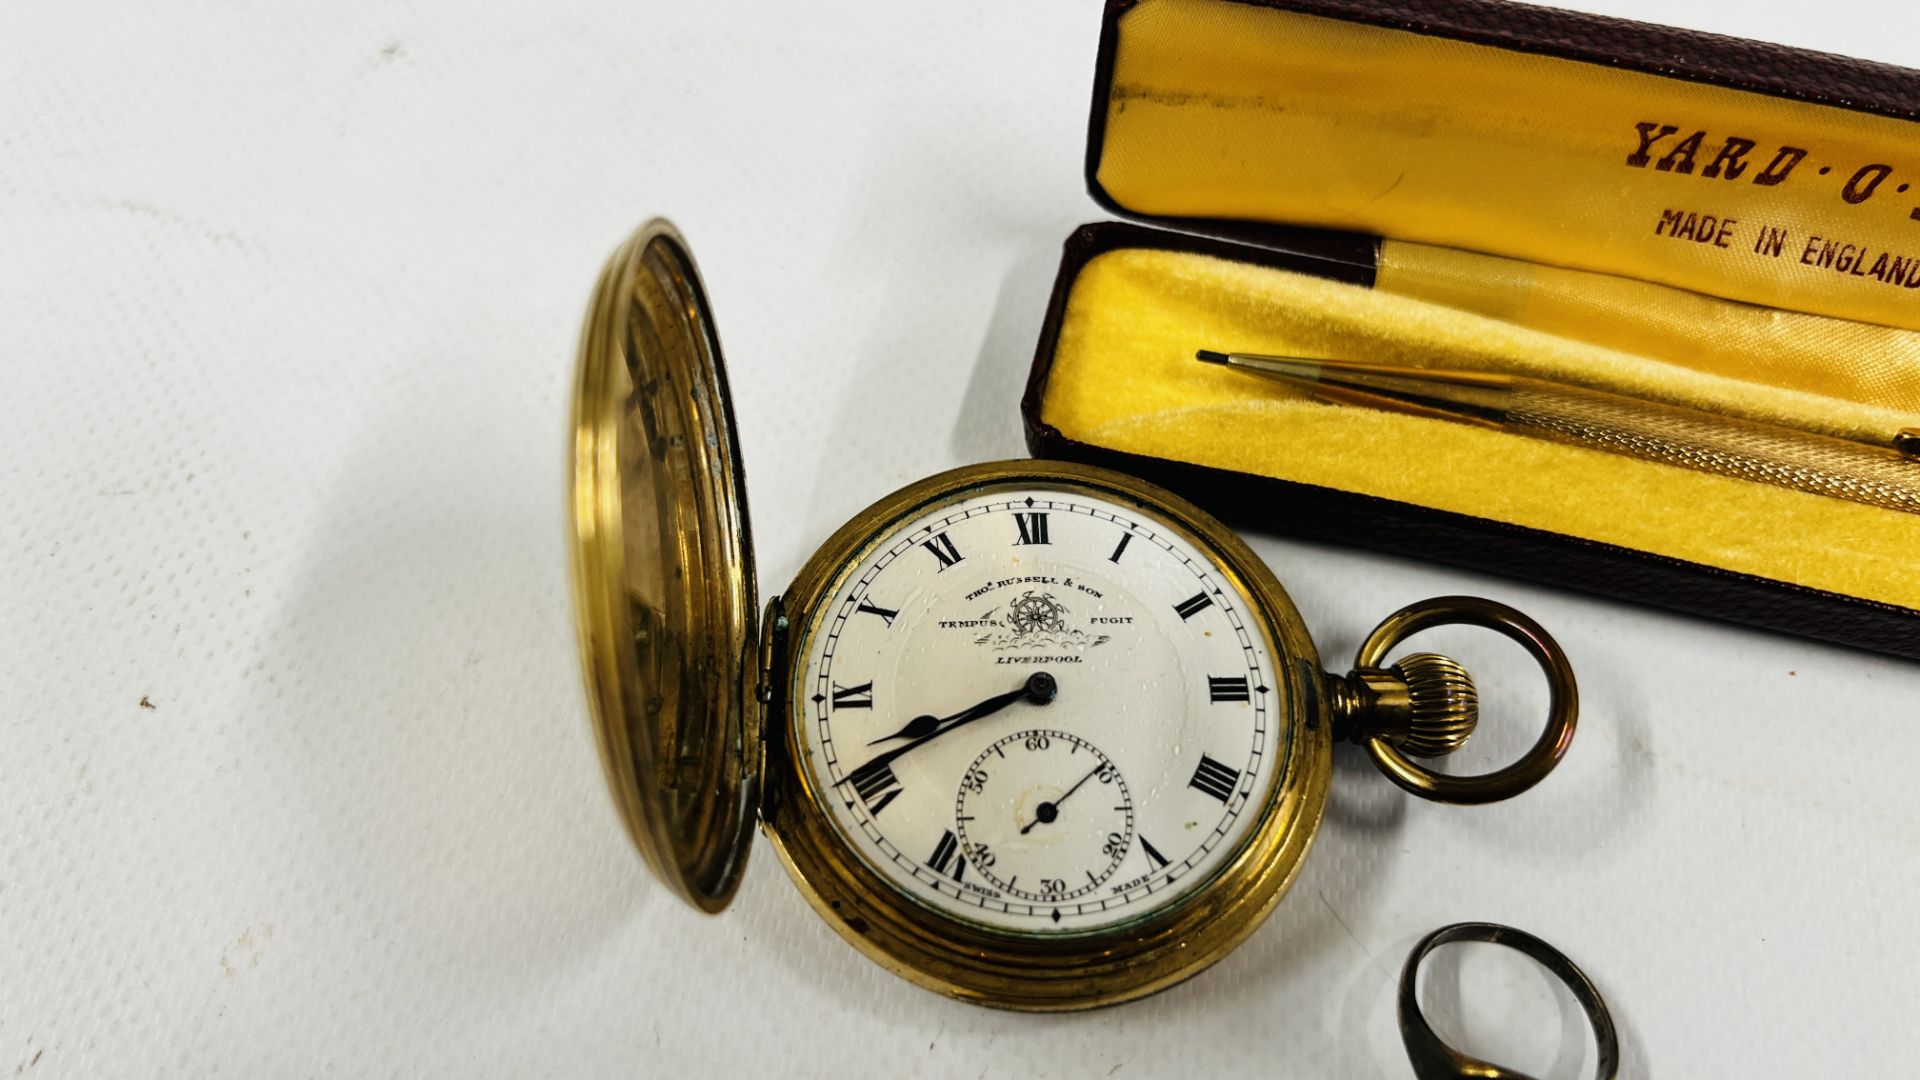 A VINTAGE WHITE METAL CASED WATCH WITH ENAMELED DIAL ON BLACK LEATHER STRAP, - Image 6 of 7